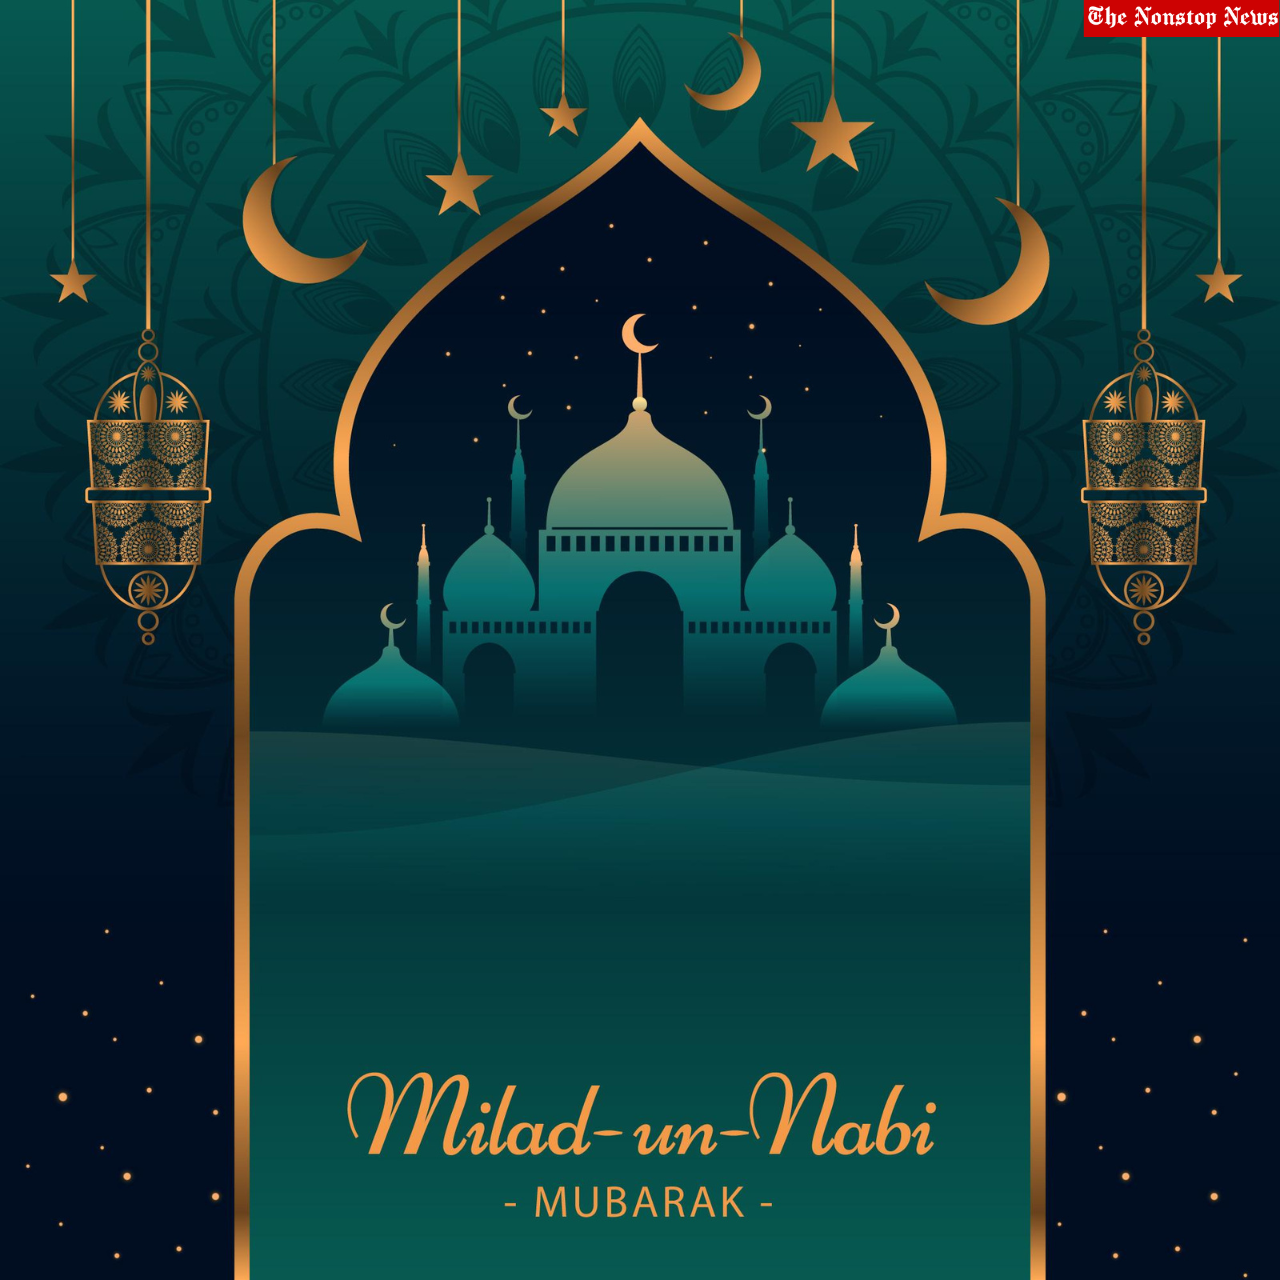 Happy Eid Milad-un-Nabi 2022: Prophet Muhammad's Birthday Greetings, Posters, HD Images, Wishes, Quotes, Messages, Shayari, Status and Dua